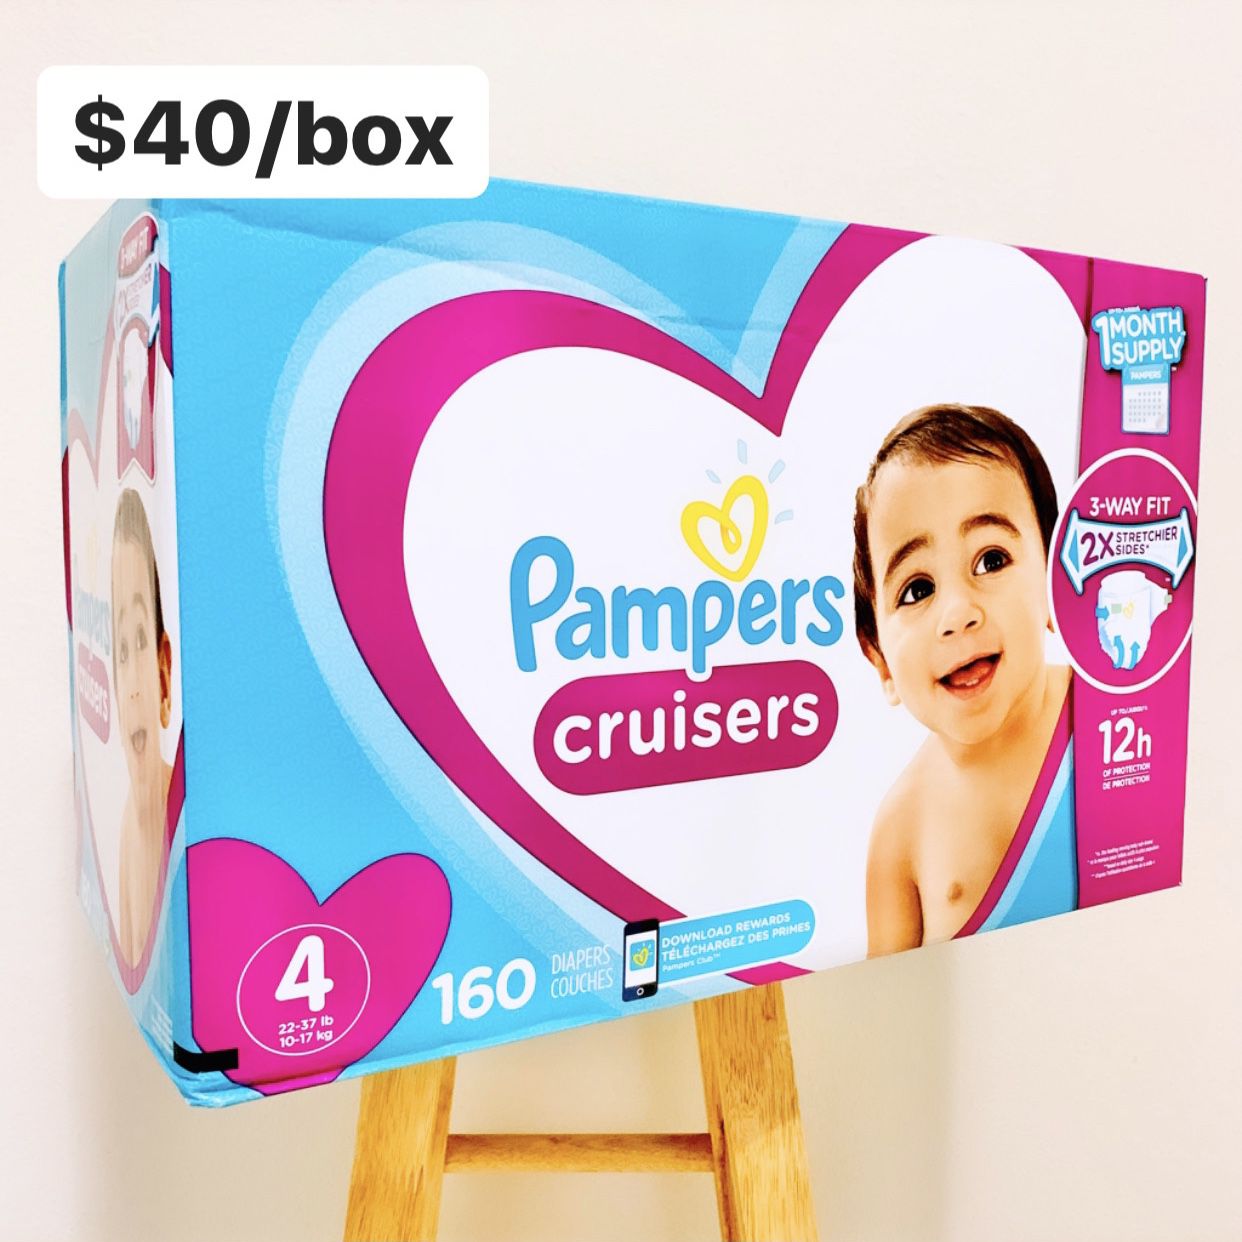 Size 4 (22-37 lbs) Pampers Cruisers (160 baby diapers) *PROMO* BUY ANY 2 PAMPERS BRAND BIG BOXES, GET 1 FREE HUGGIES TUB 64ct